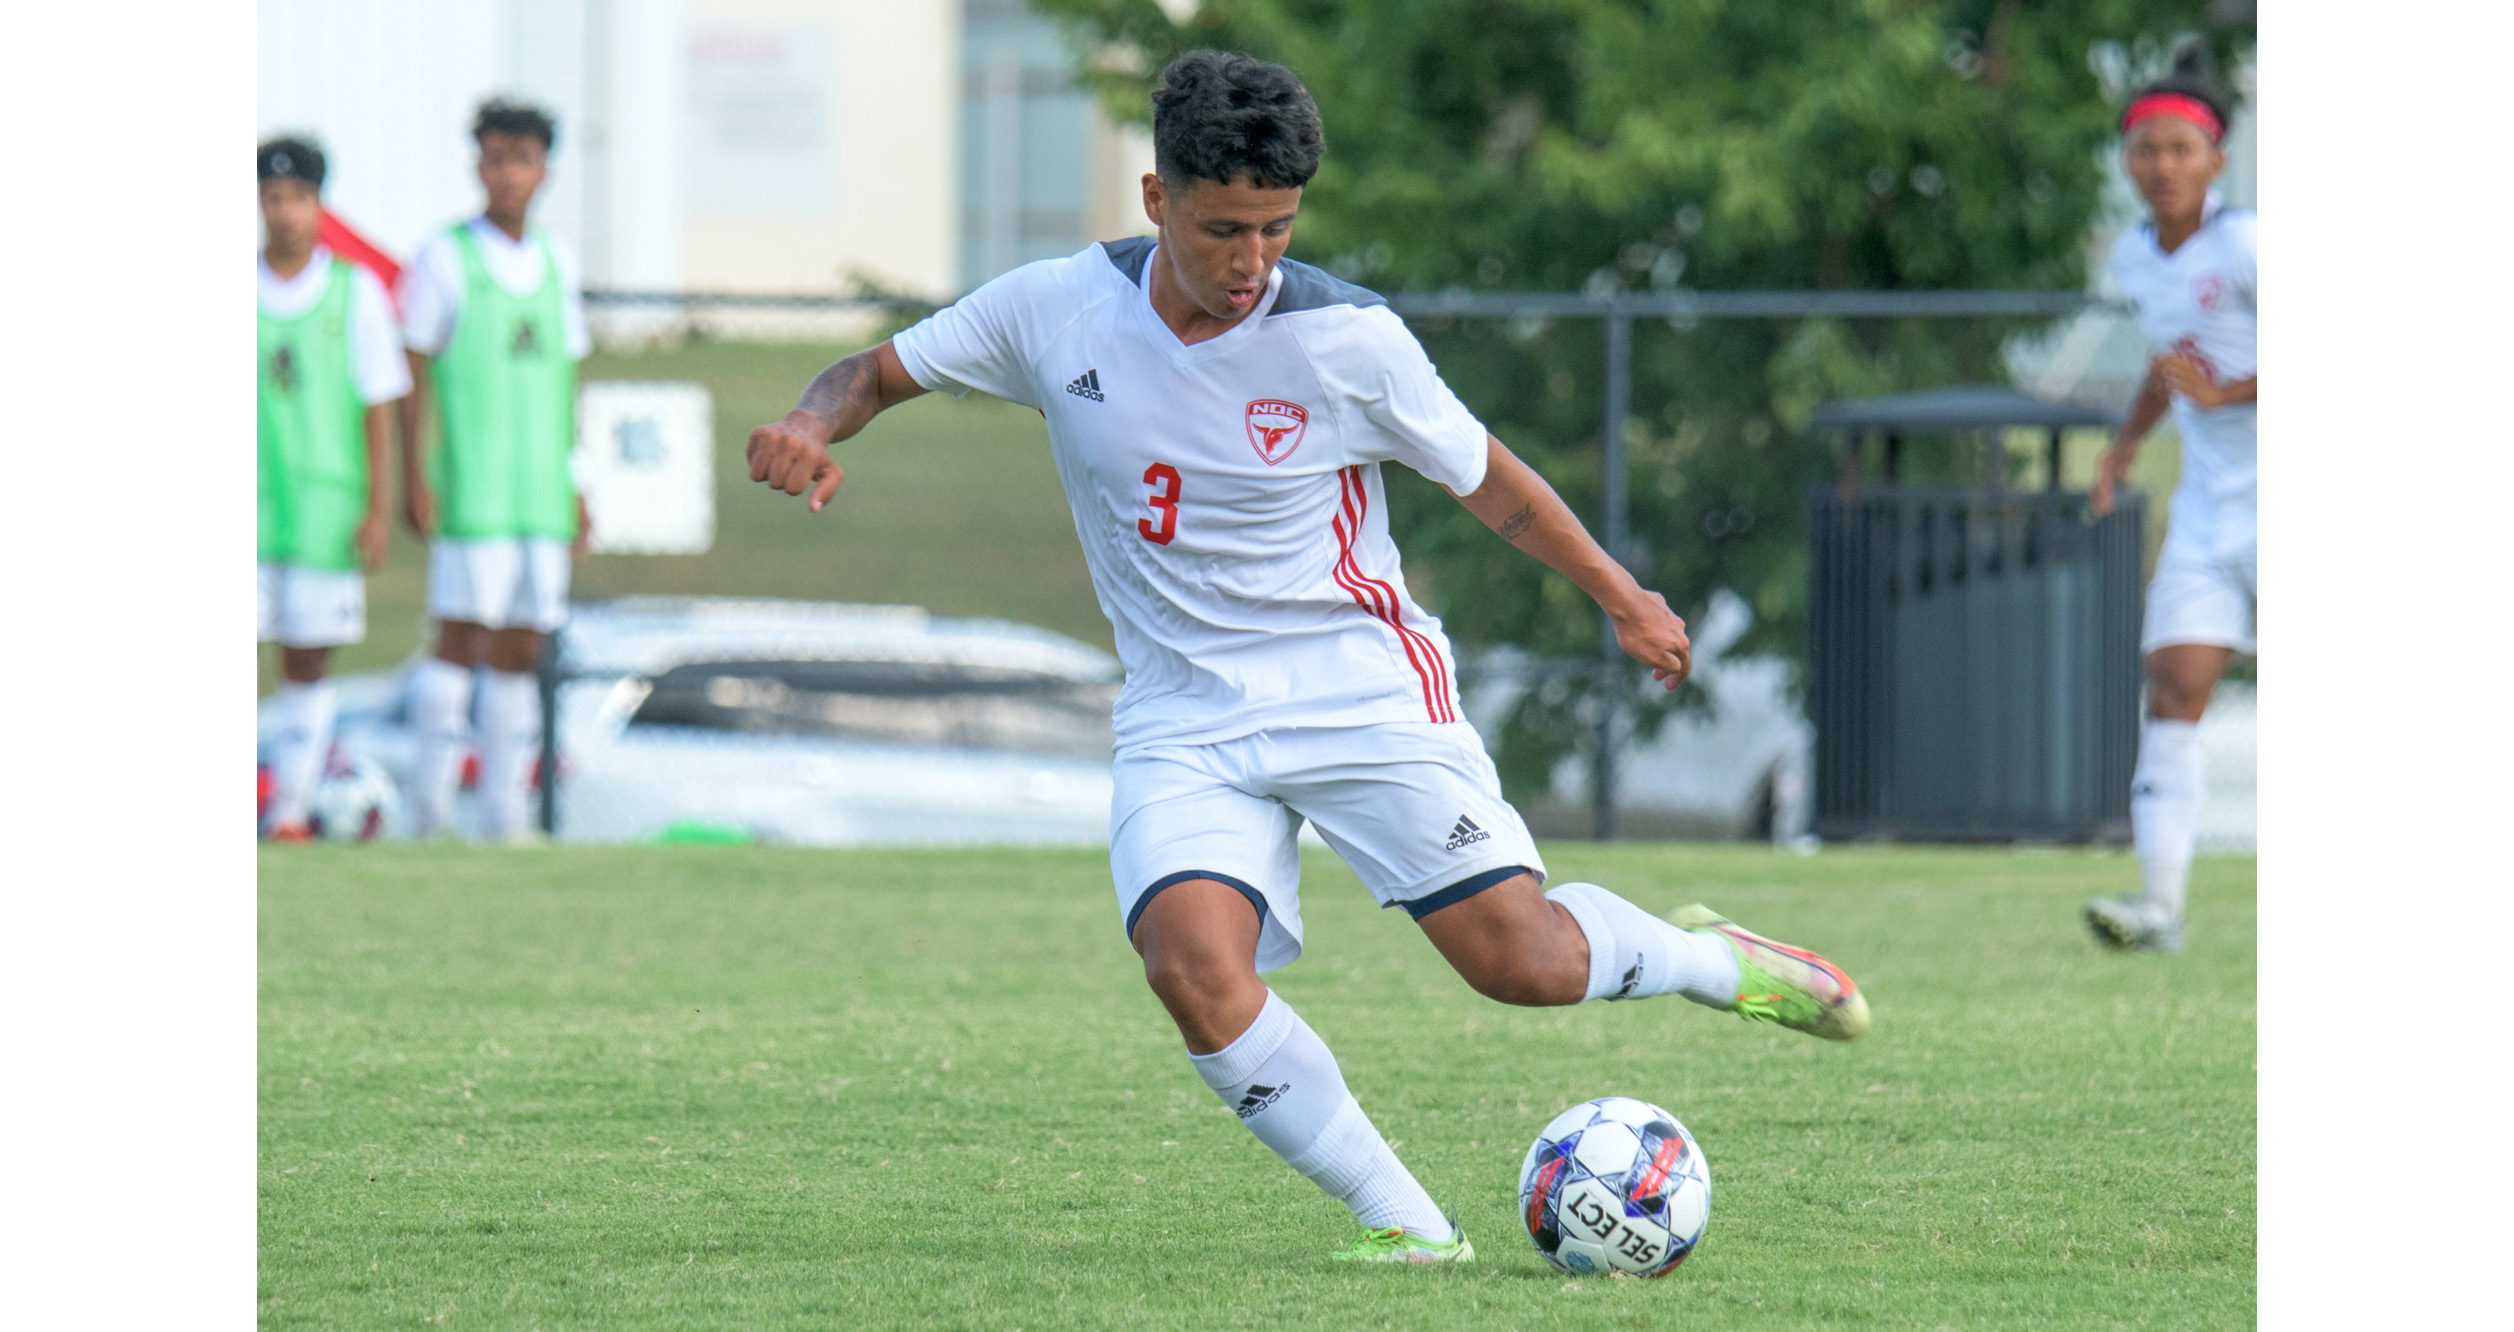 Mistakes cost men's soccer in 3-1 loss to NEO